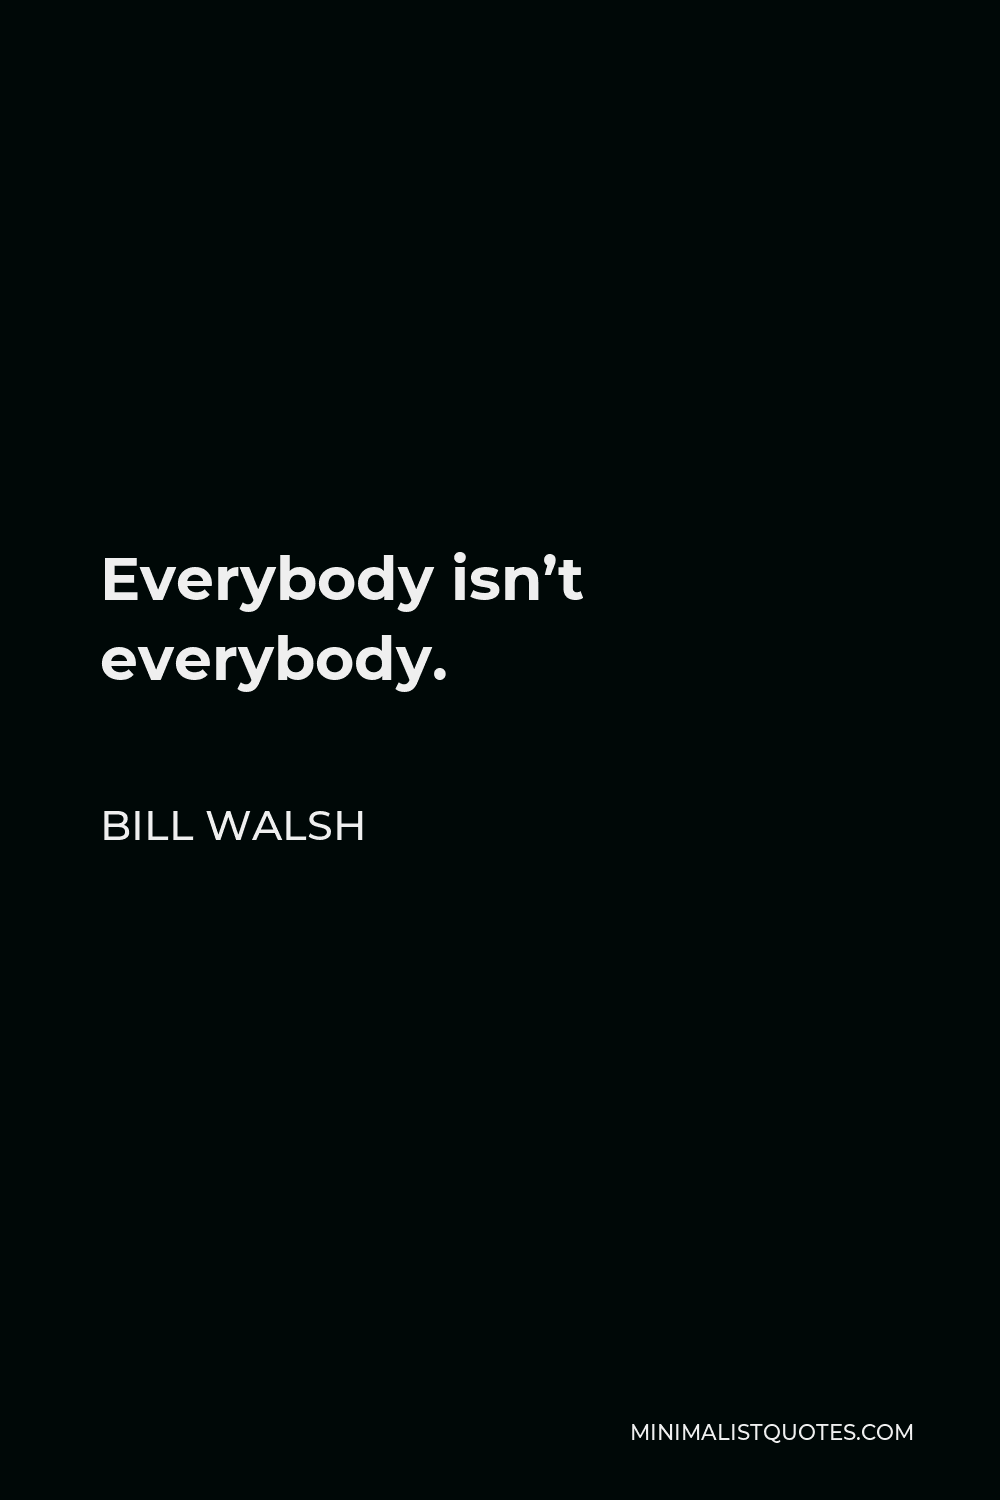 Bill Walsh Quote - Everybody isn’t everybody.